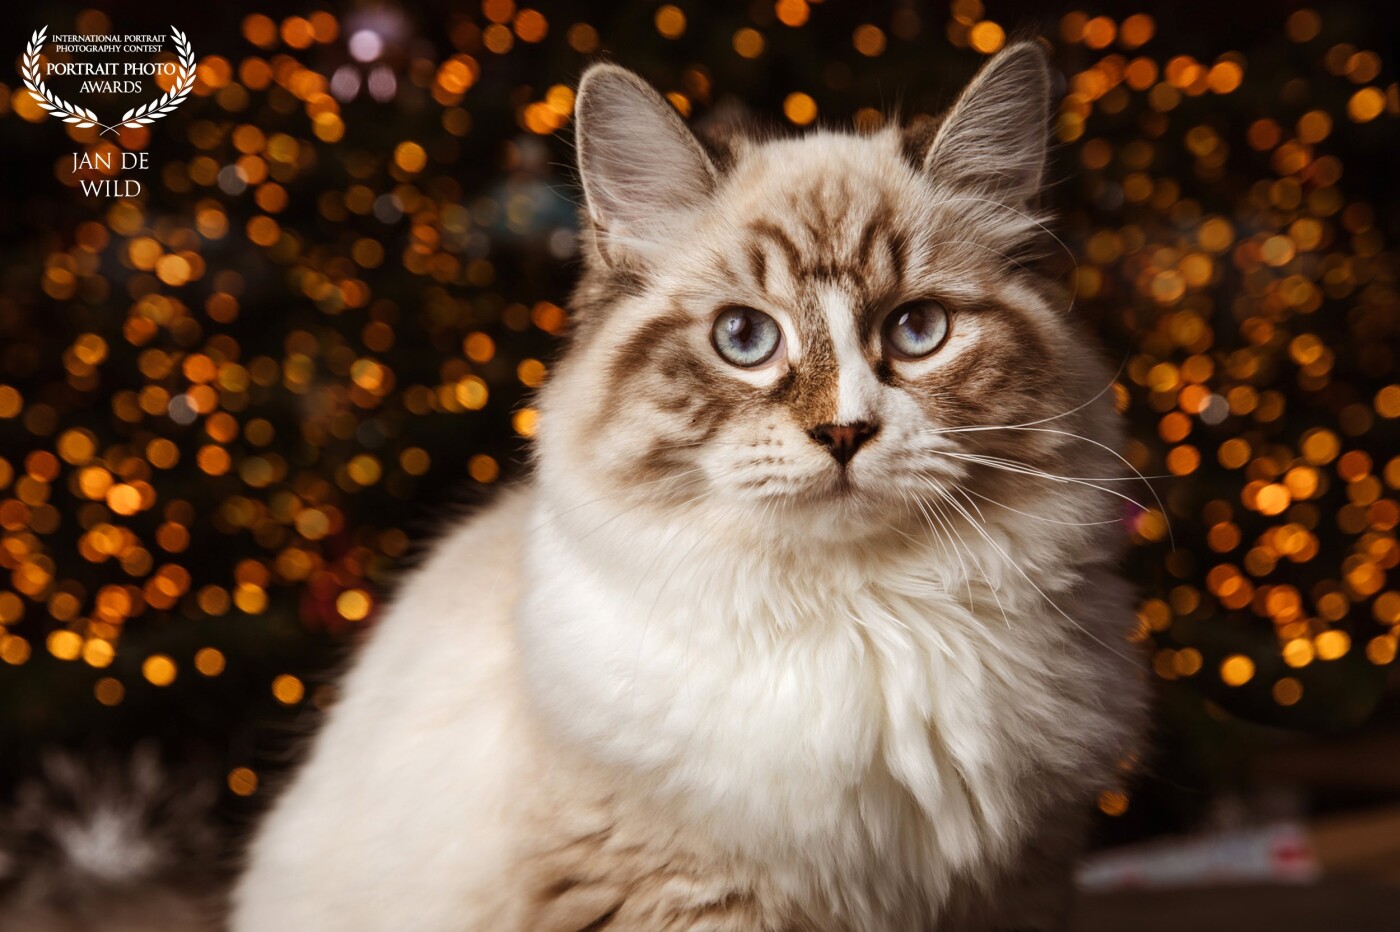 This was one of the shots from the Christmas shoot with our beautiful Siberian cat, she don't like to pose so this was one of the best photos